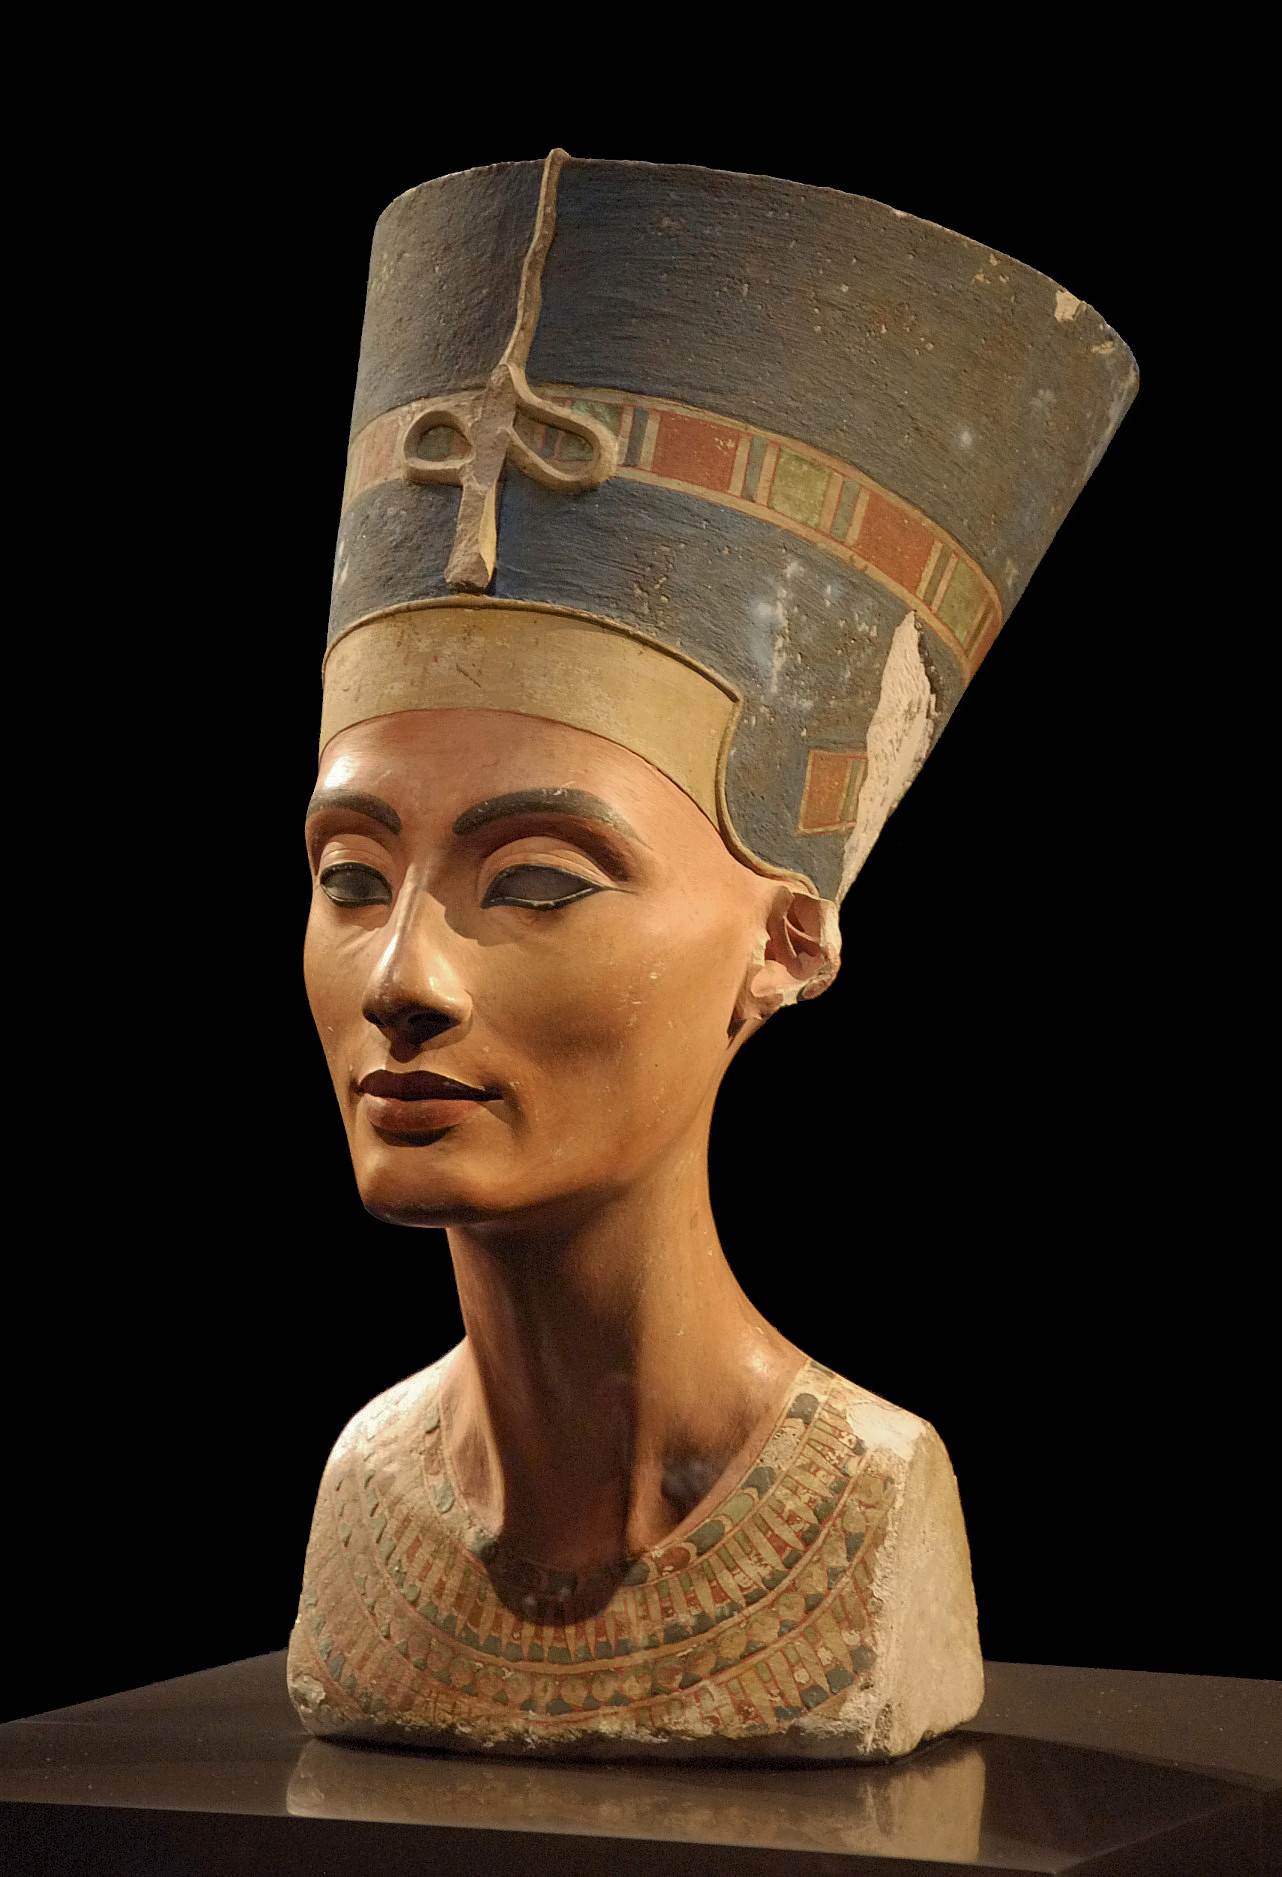 Picture of the Nefertiti bust, discovered in Akhenaton's capital Amarna on December 6, 1912. The bust is in the Neues Museum, Berlin.